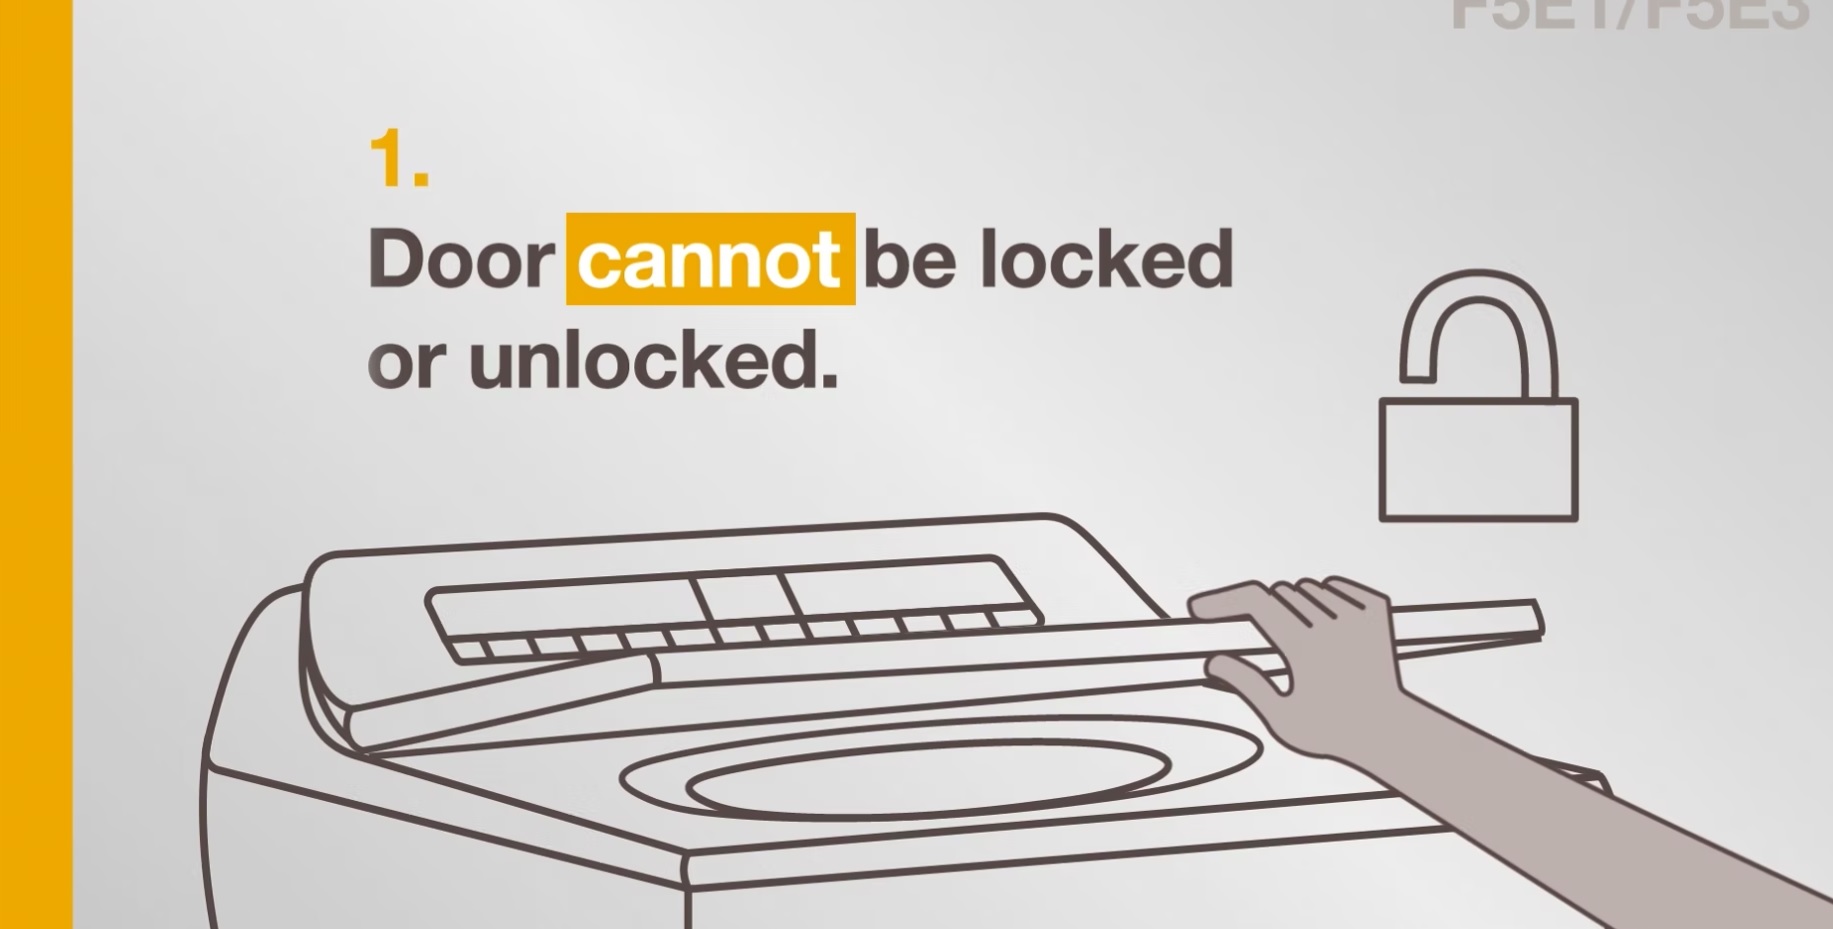 Follow these simple steps to resolve Error Code F5E1/F5E3 on your Whirlpool Brand® washer. This video will assist you if you are experiencing a problem detected with the door lock. If you need further assistance call for service at 1-866-333-4591.